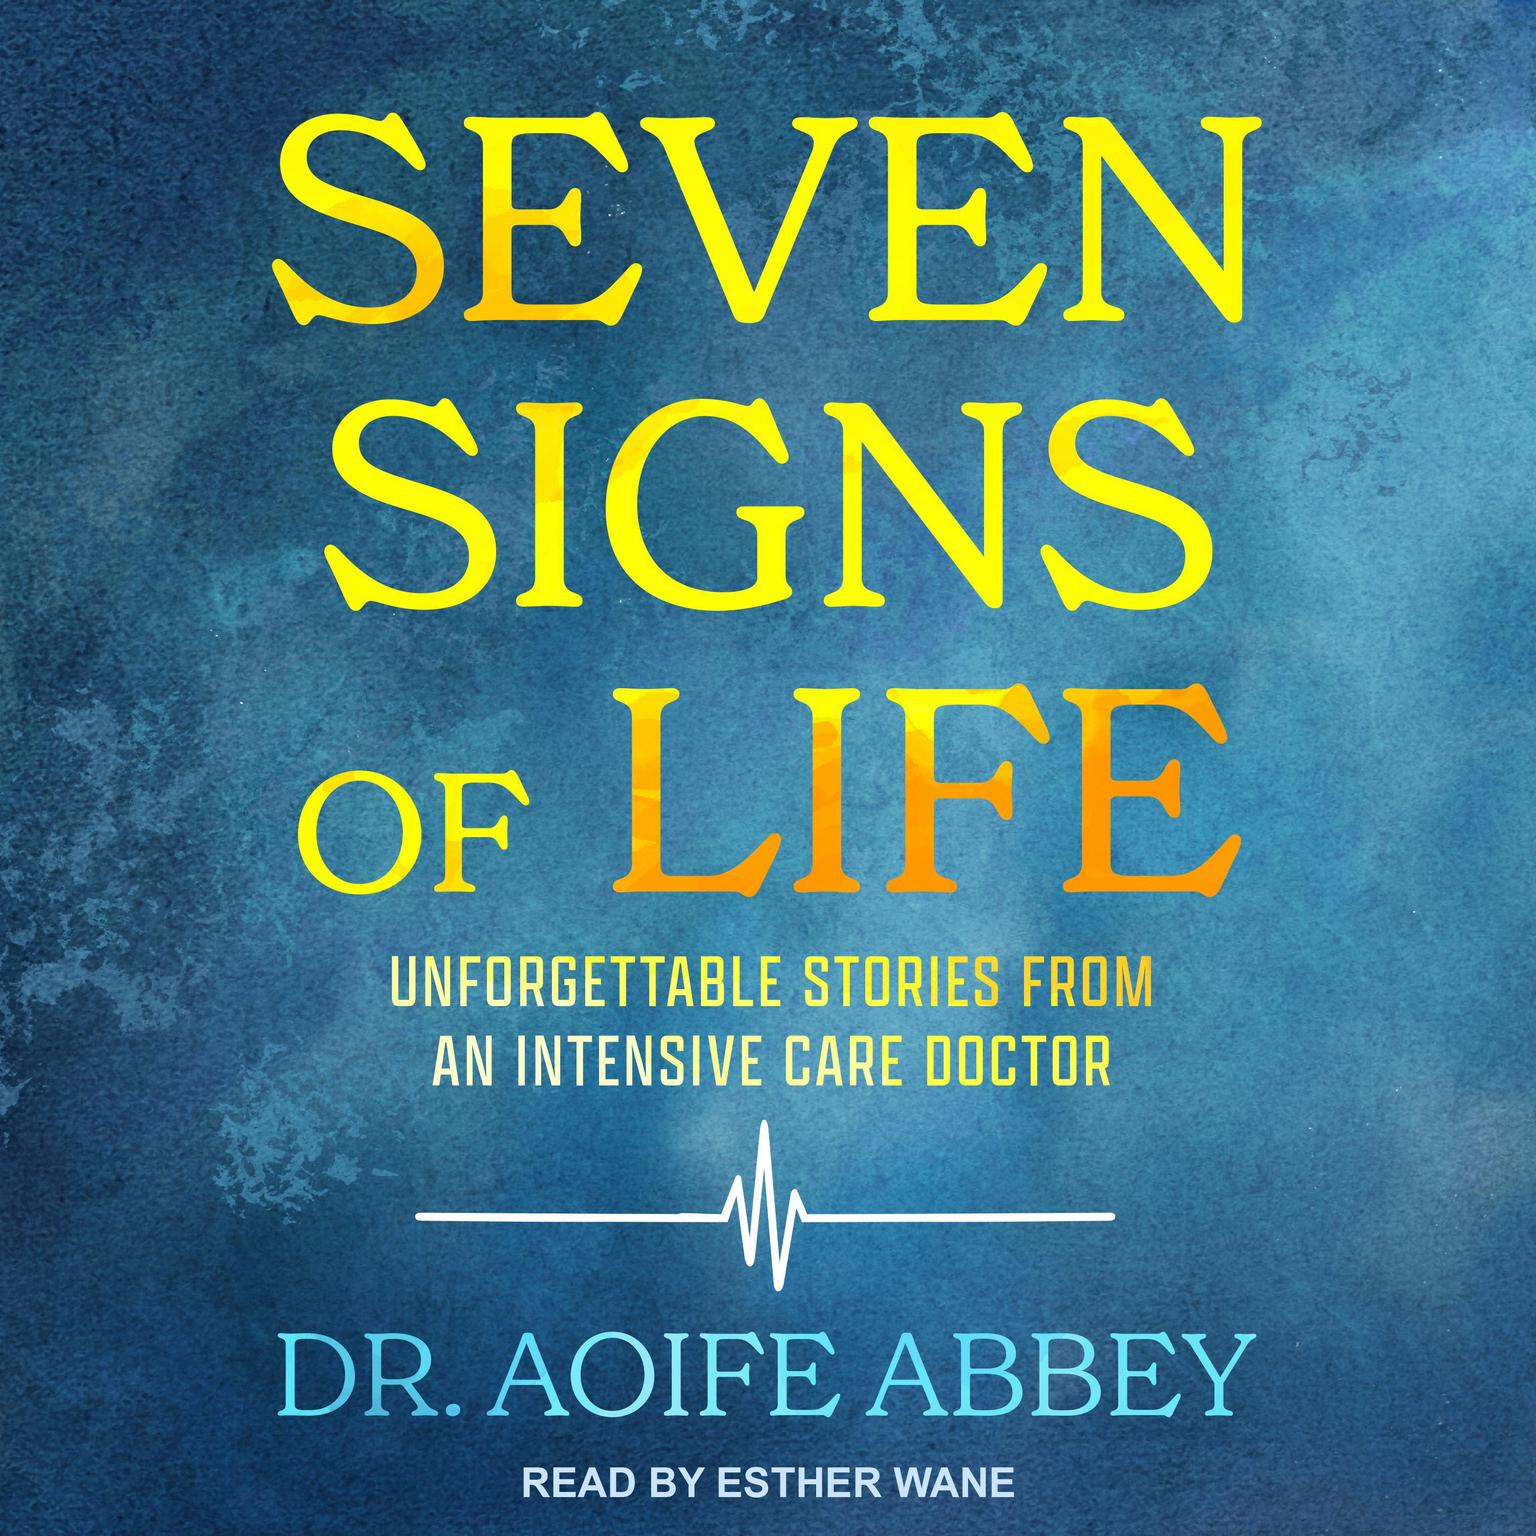 Seven Signs of Life: Unforgettable Stories from an Intensive Care Doctor Audiobook, by Aoife Abbey